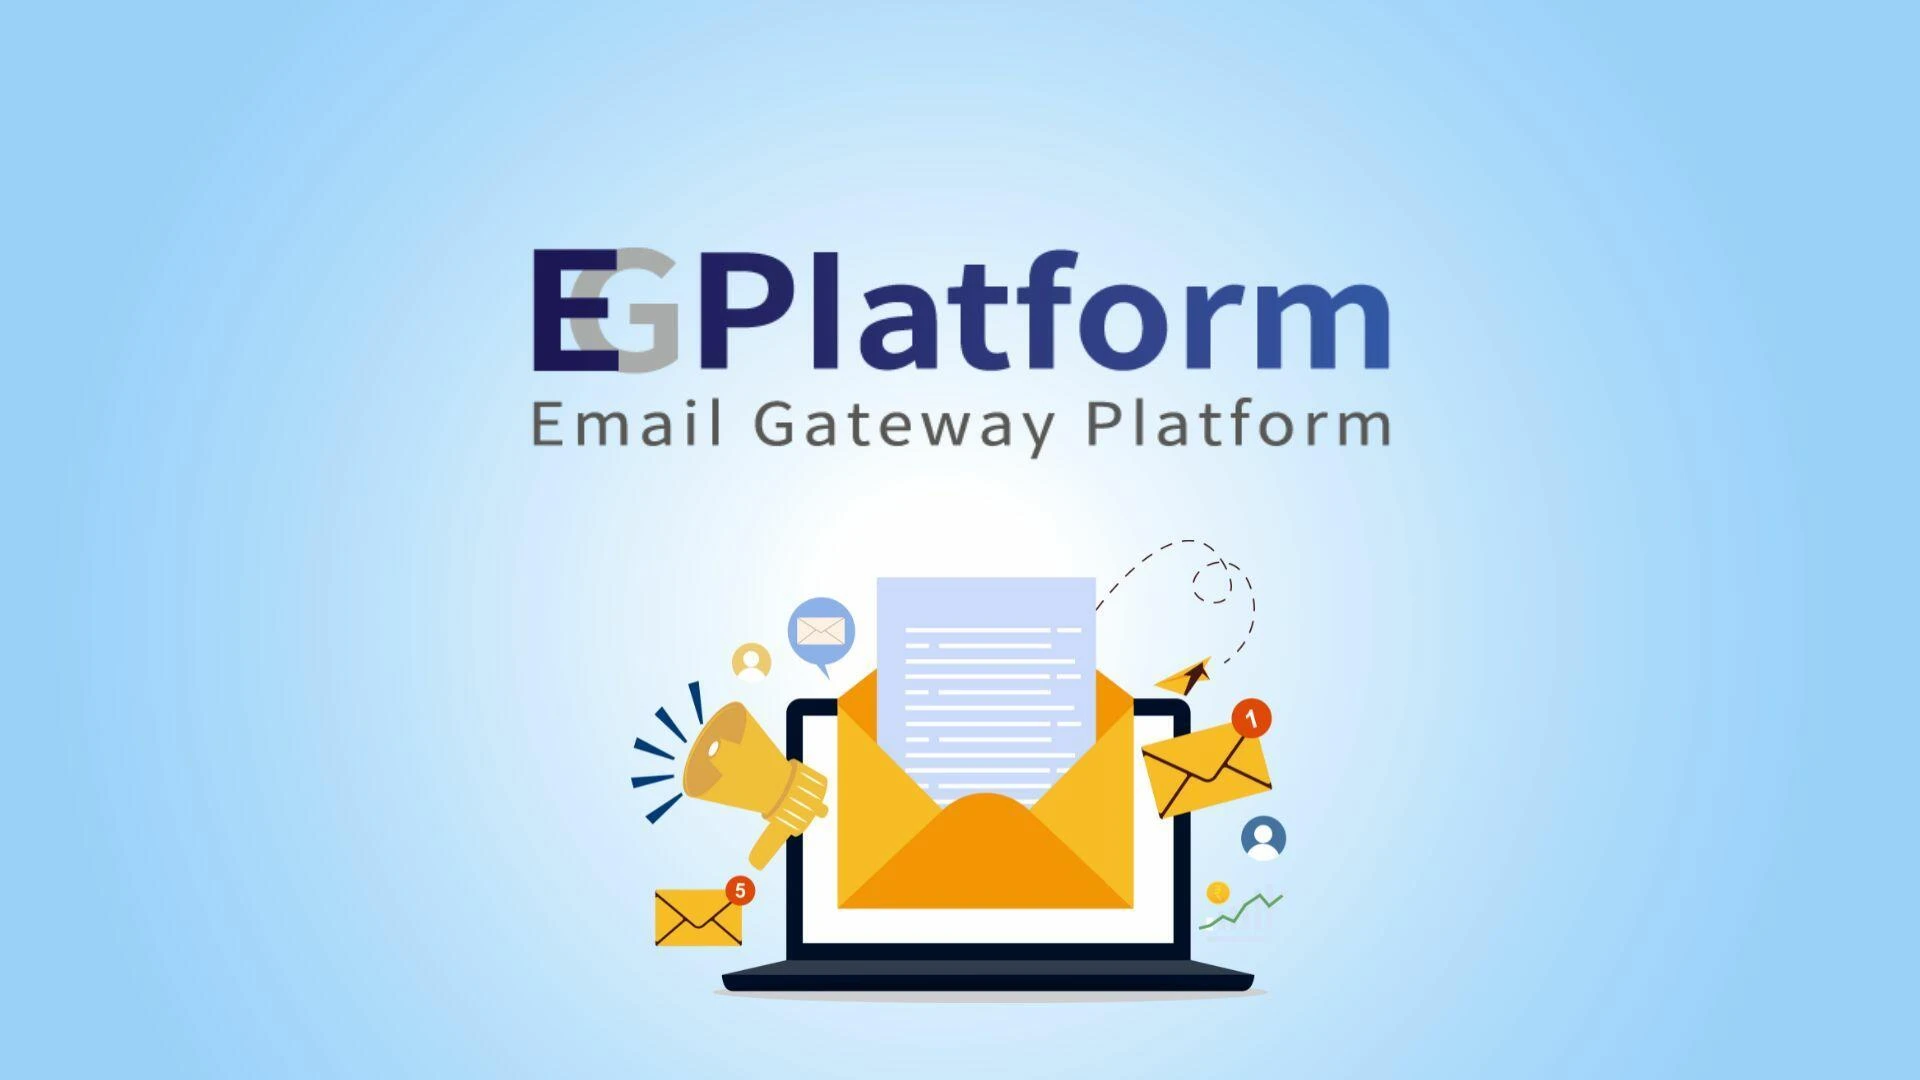 EG-Platform: The ultimate security solution for business's email